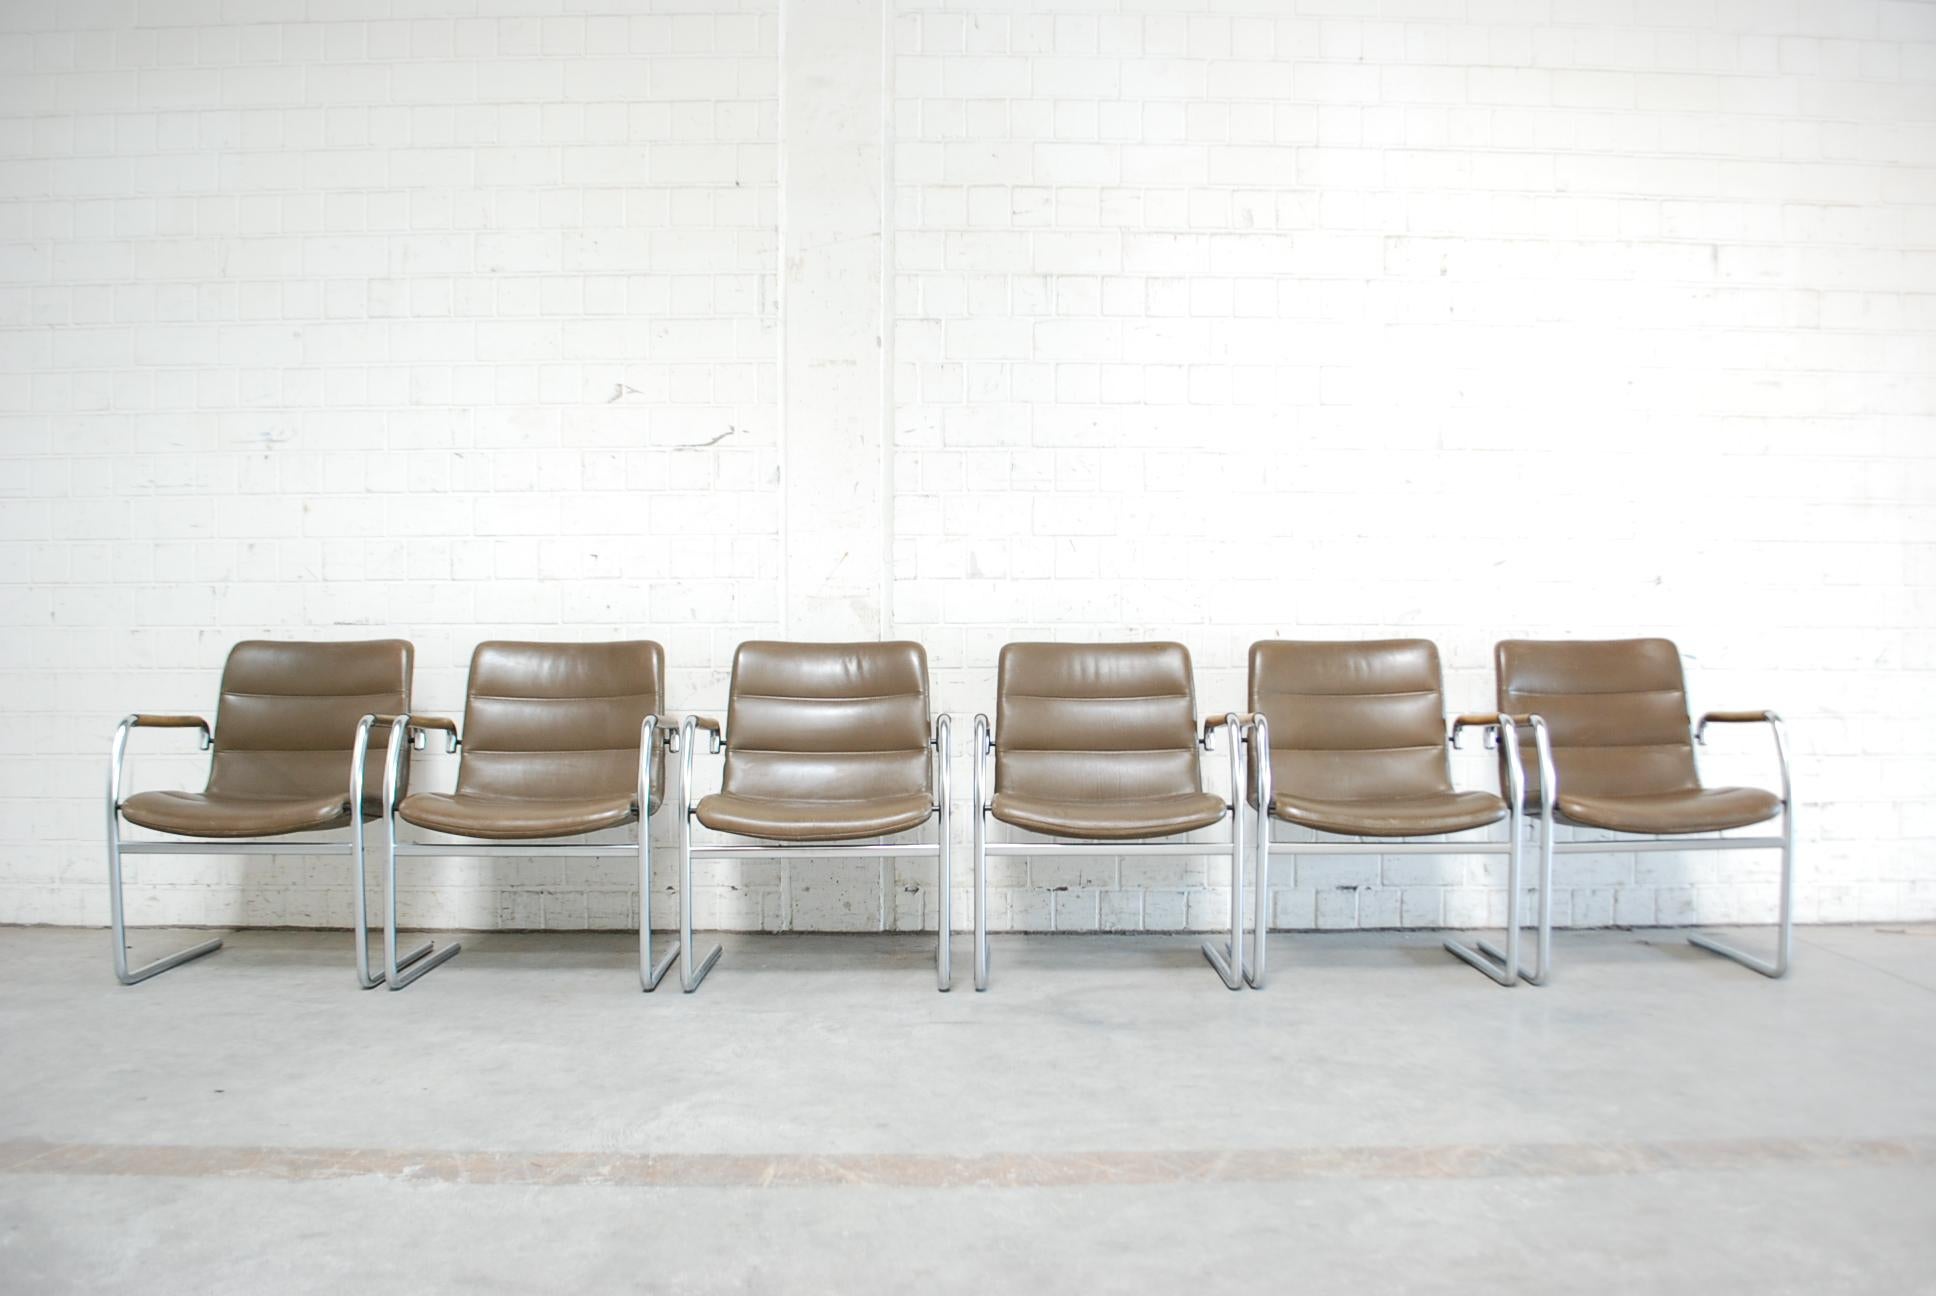 This set of six cantilever chairs was designed by Jorgen Kastholm for Kusch + Co.
The pieces comprise matte-chromed tubular steel bases and brown / olive leather upholstery along with patinated armrests.
Height seating comfort.
It can be used in